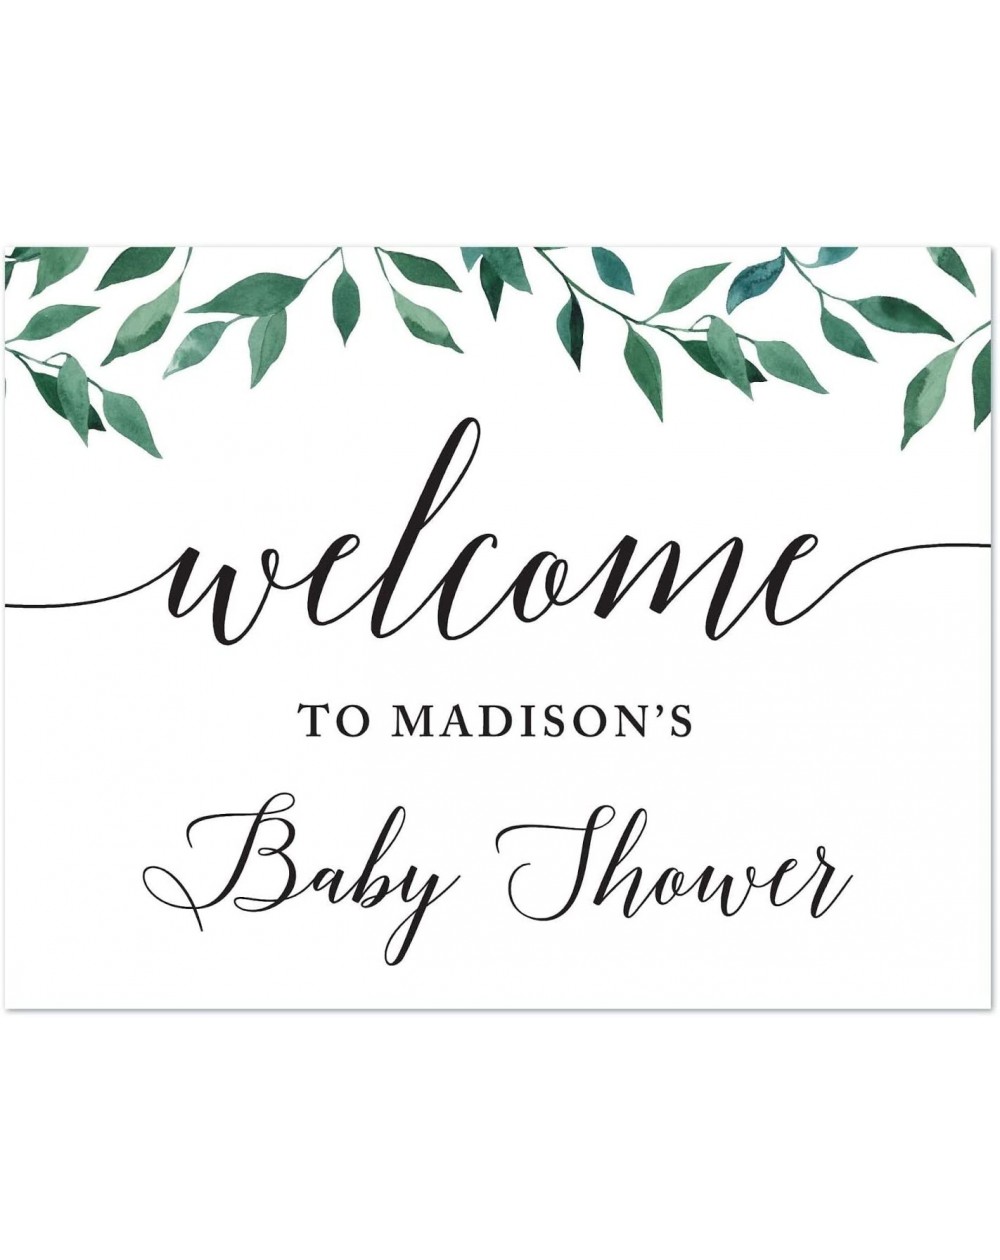 Favors Personalized Baby Shower Party Signs- Natural Greenery Green Leaves- 8.5x11-inch- Welcome to Madison's Baby Shower Sig...